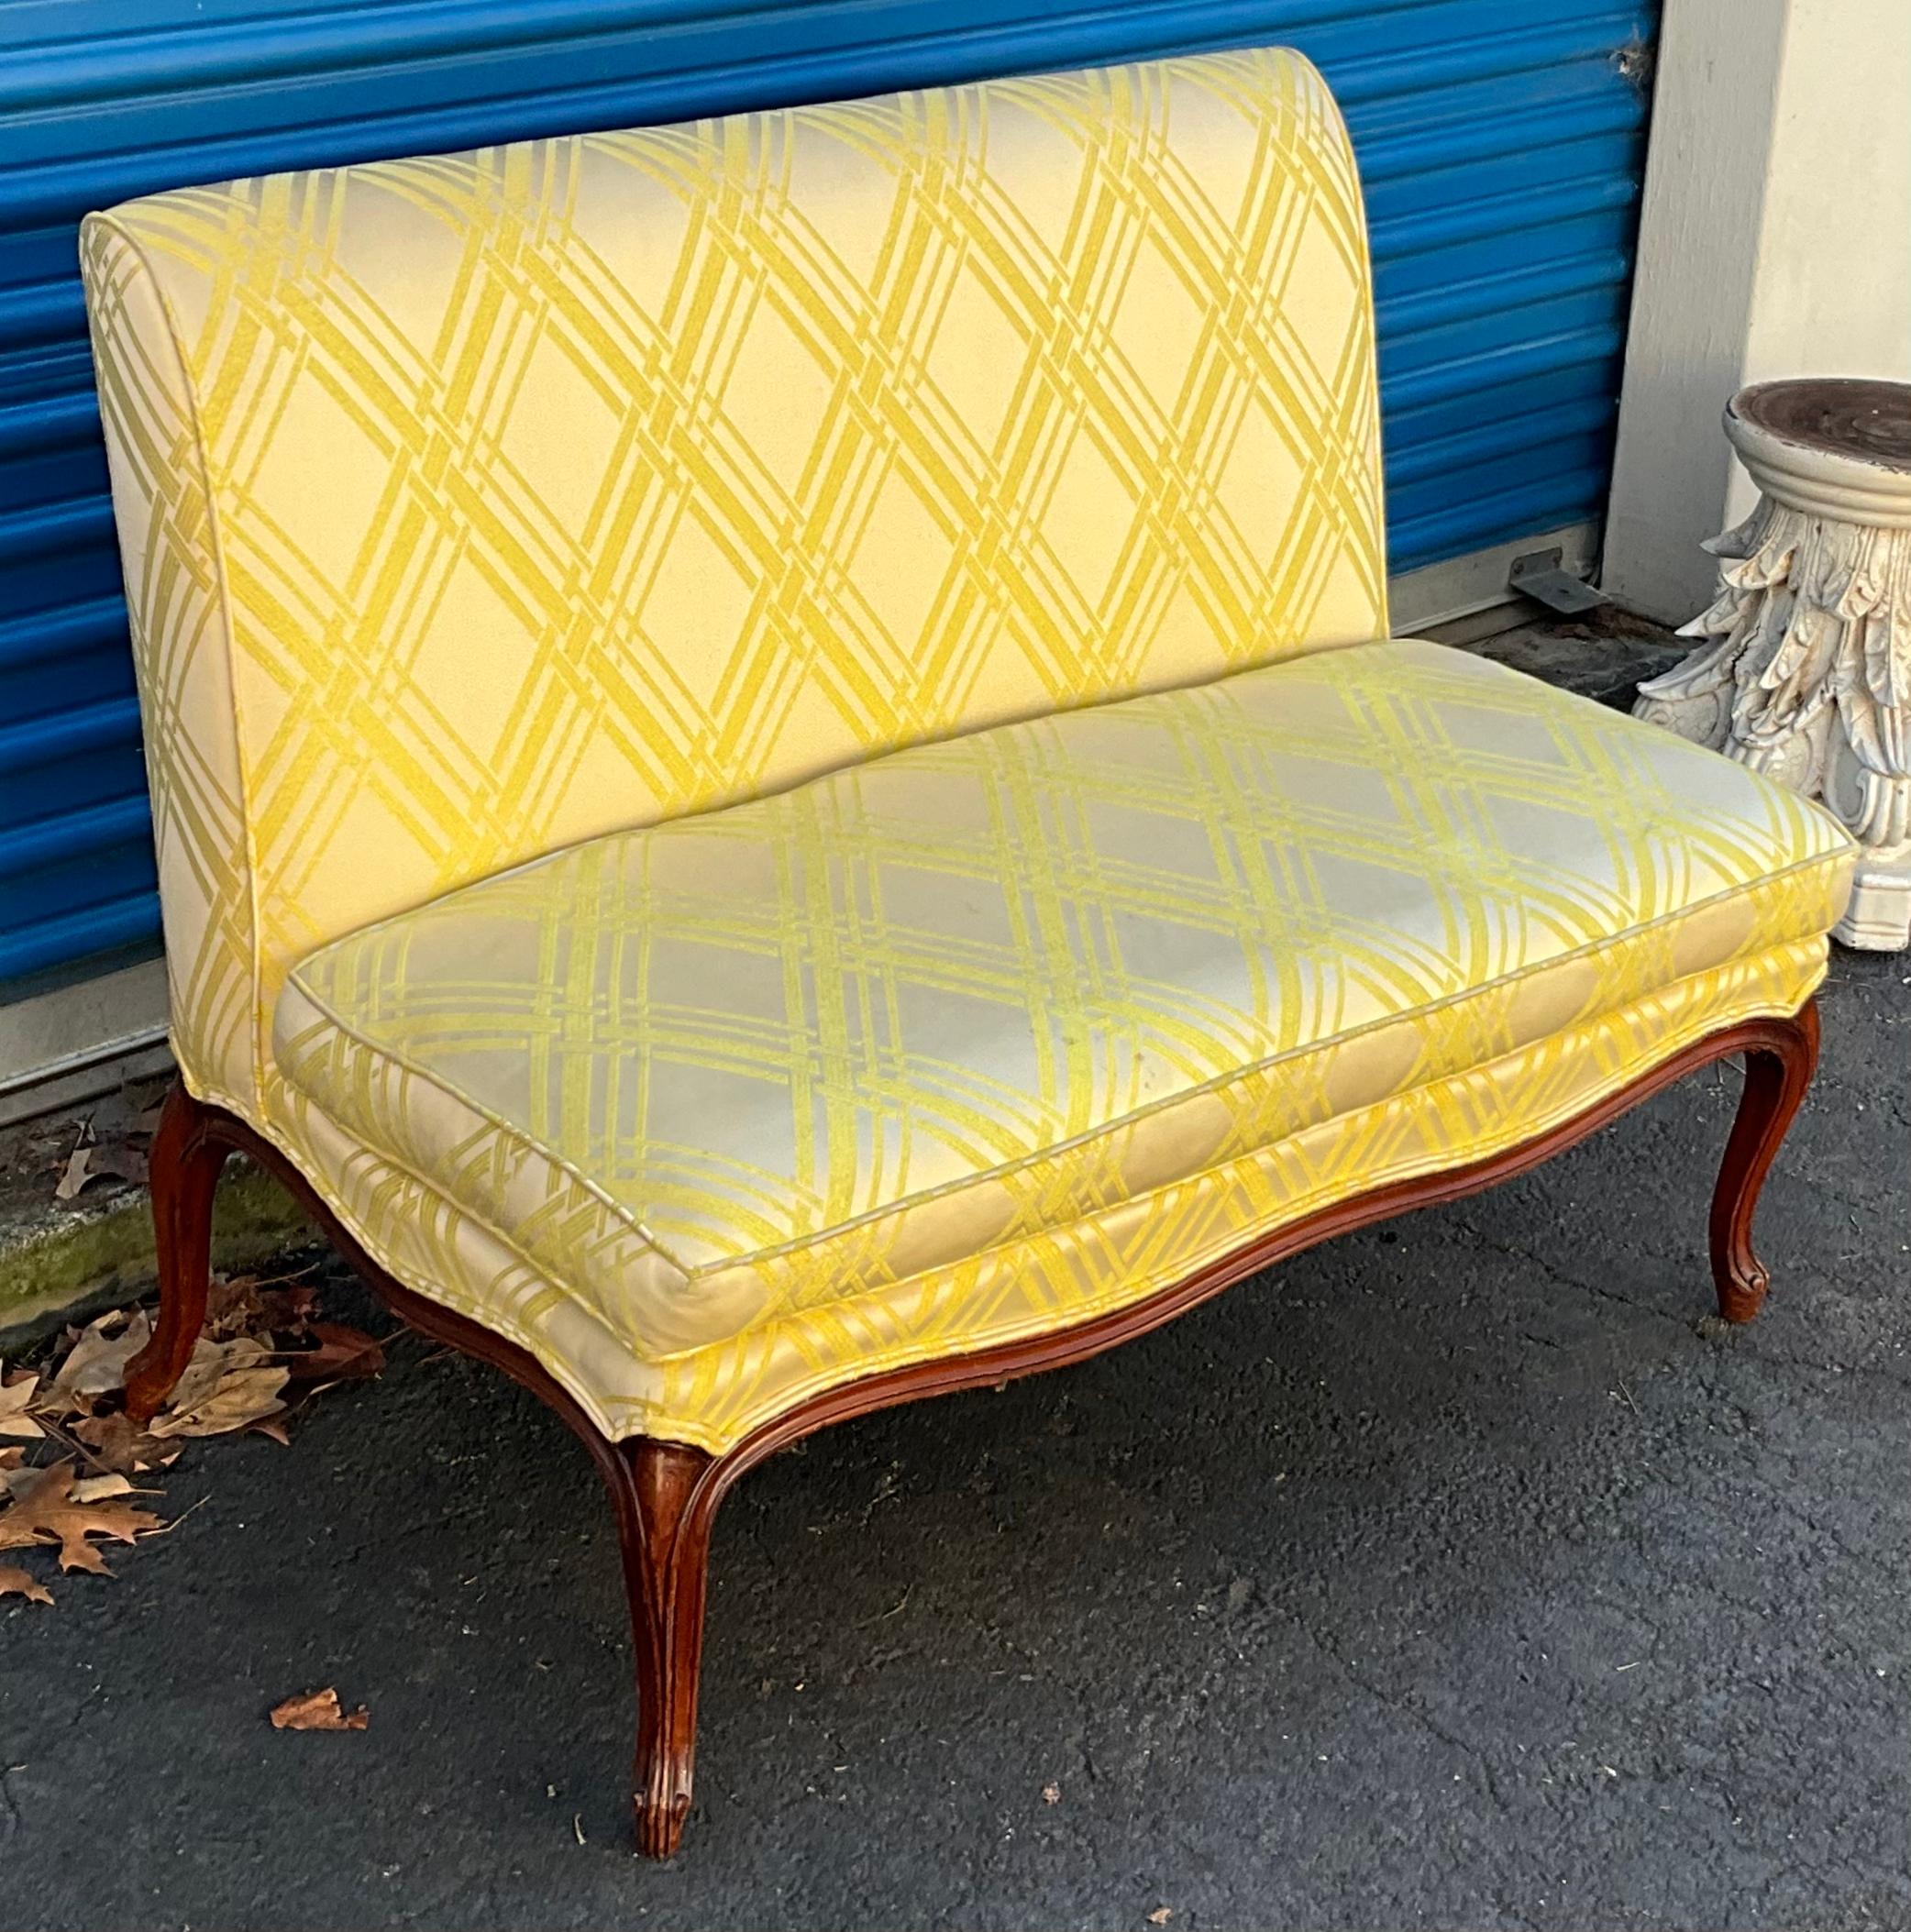 20th Century Midcentury French Provincial Style Settees in Regency Yellow, Pair For Sale